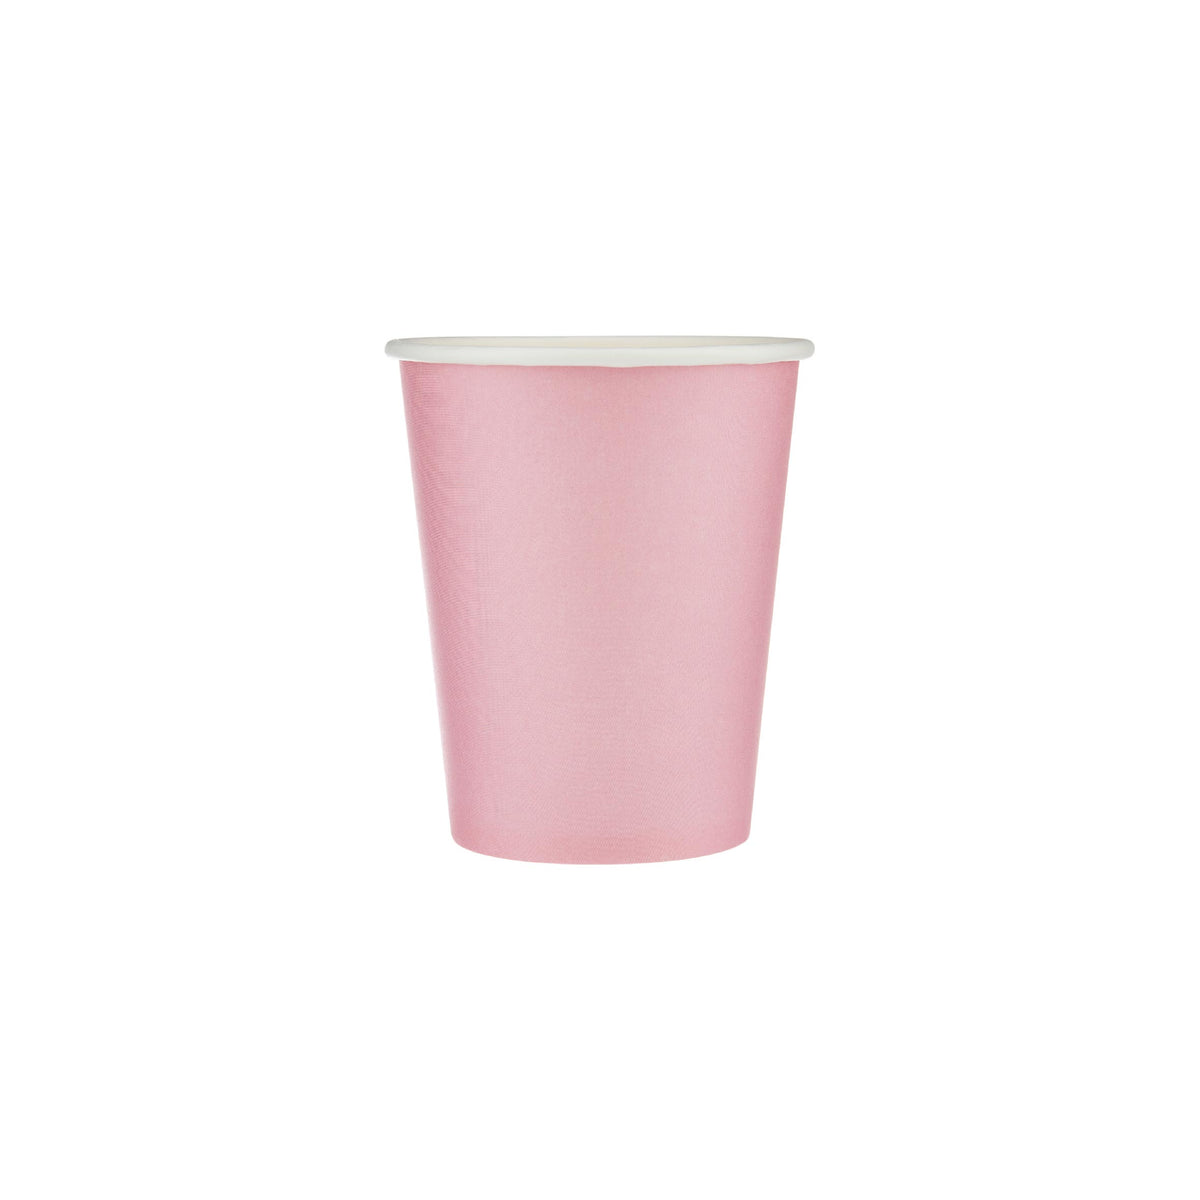 Pink paper cup 8oz for Girl theme party - Hotpack Global